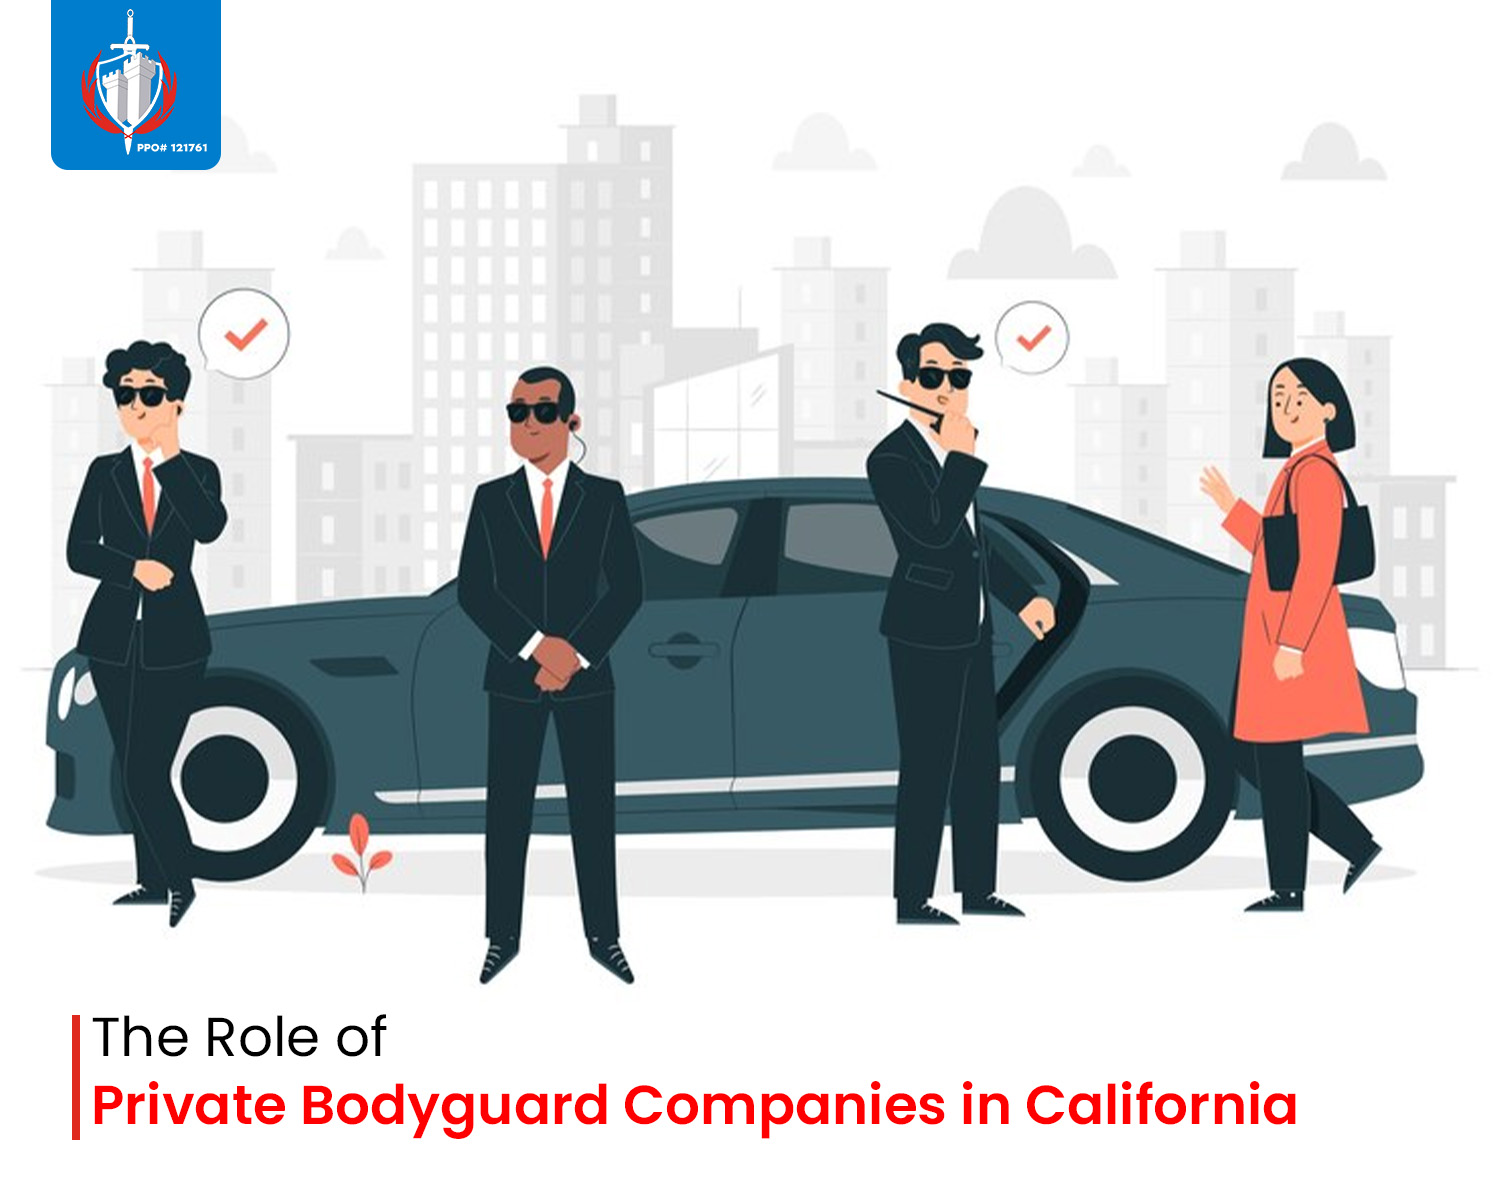 The Role of Private Bodyguard Companies in California